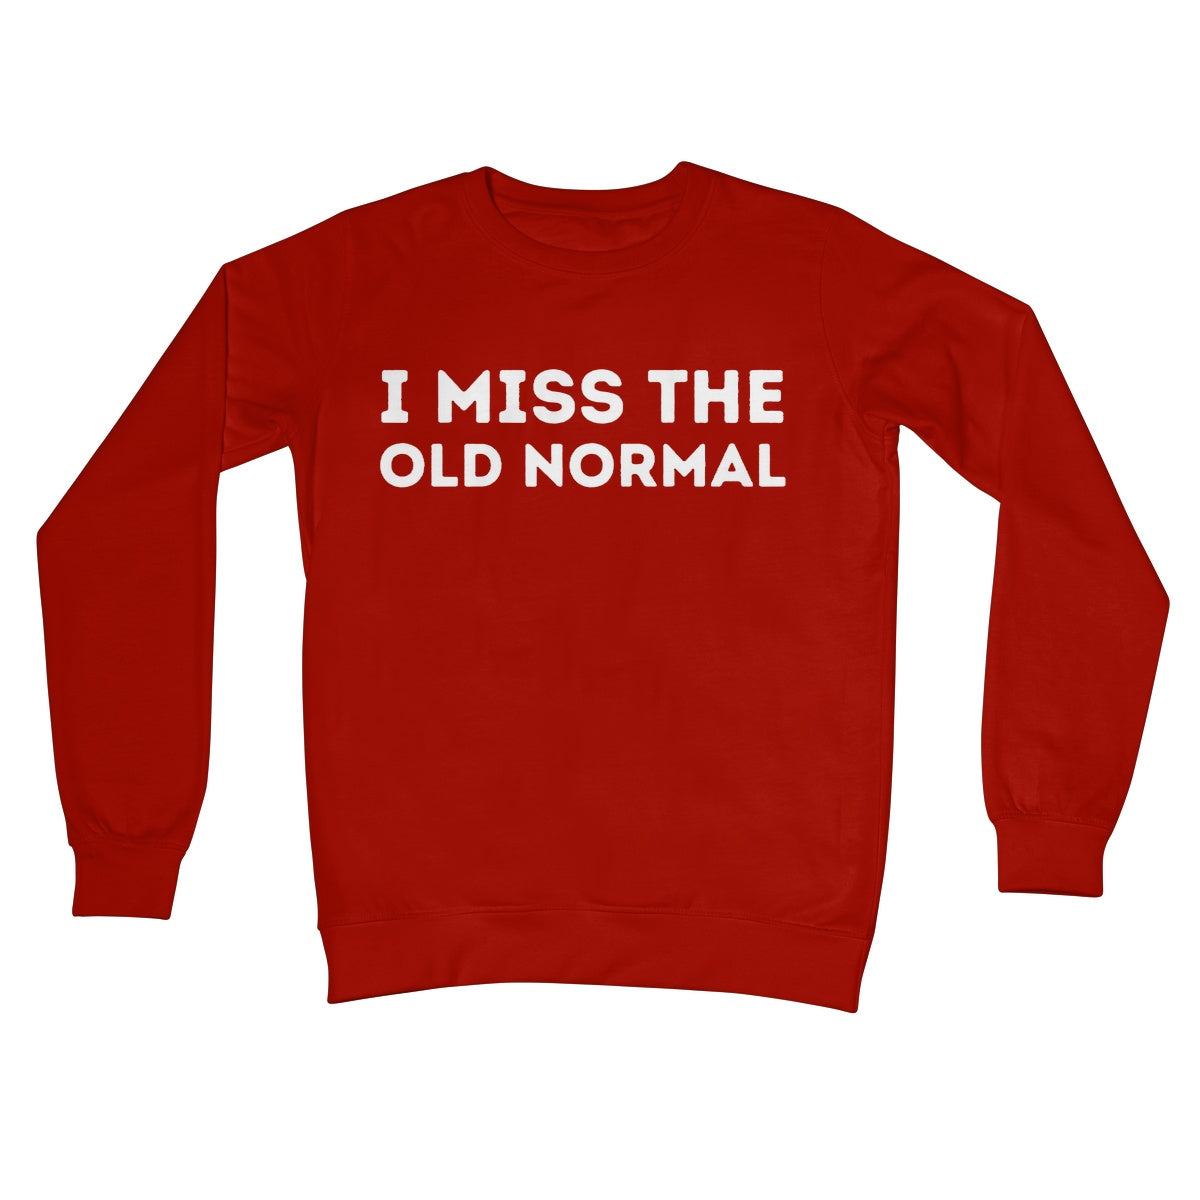 I miss the old normal jumper red